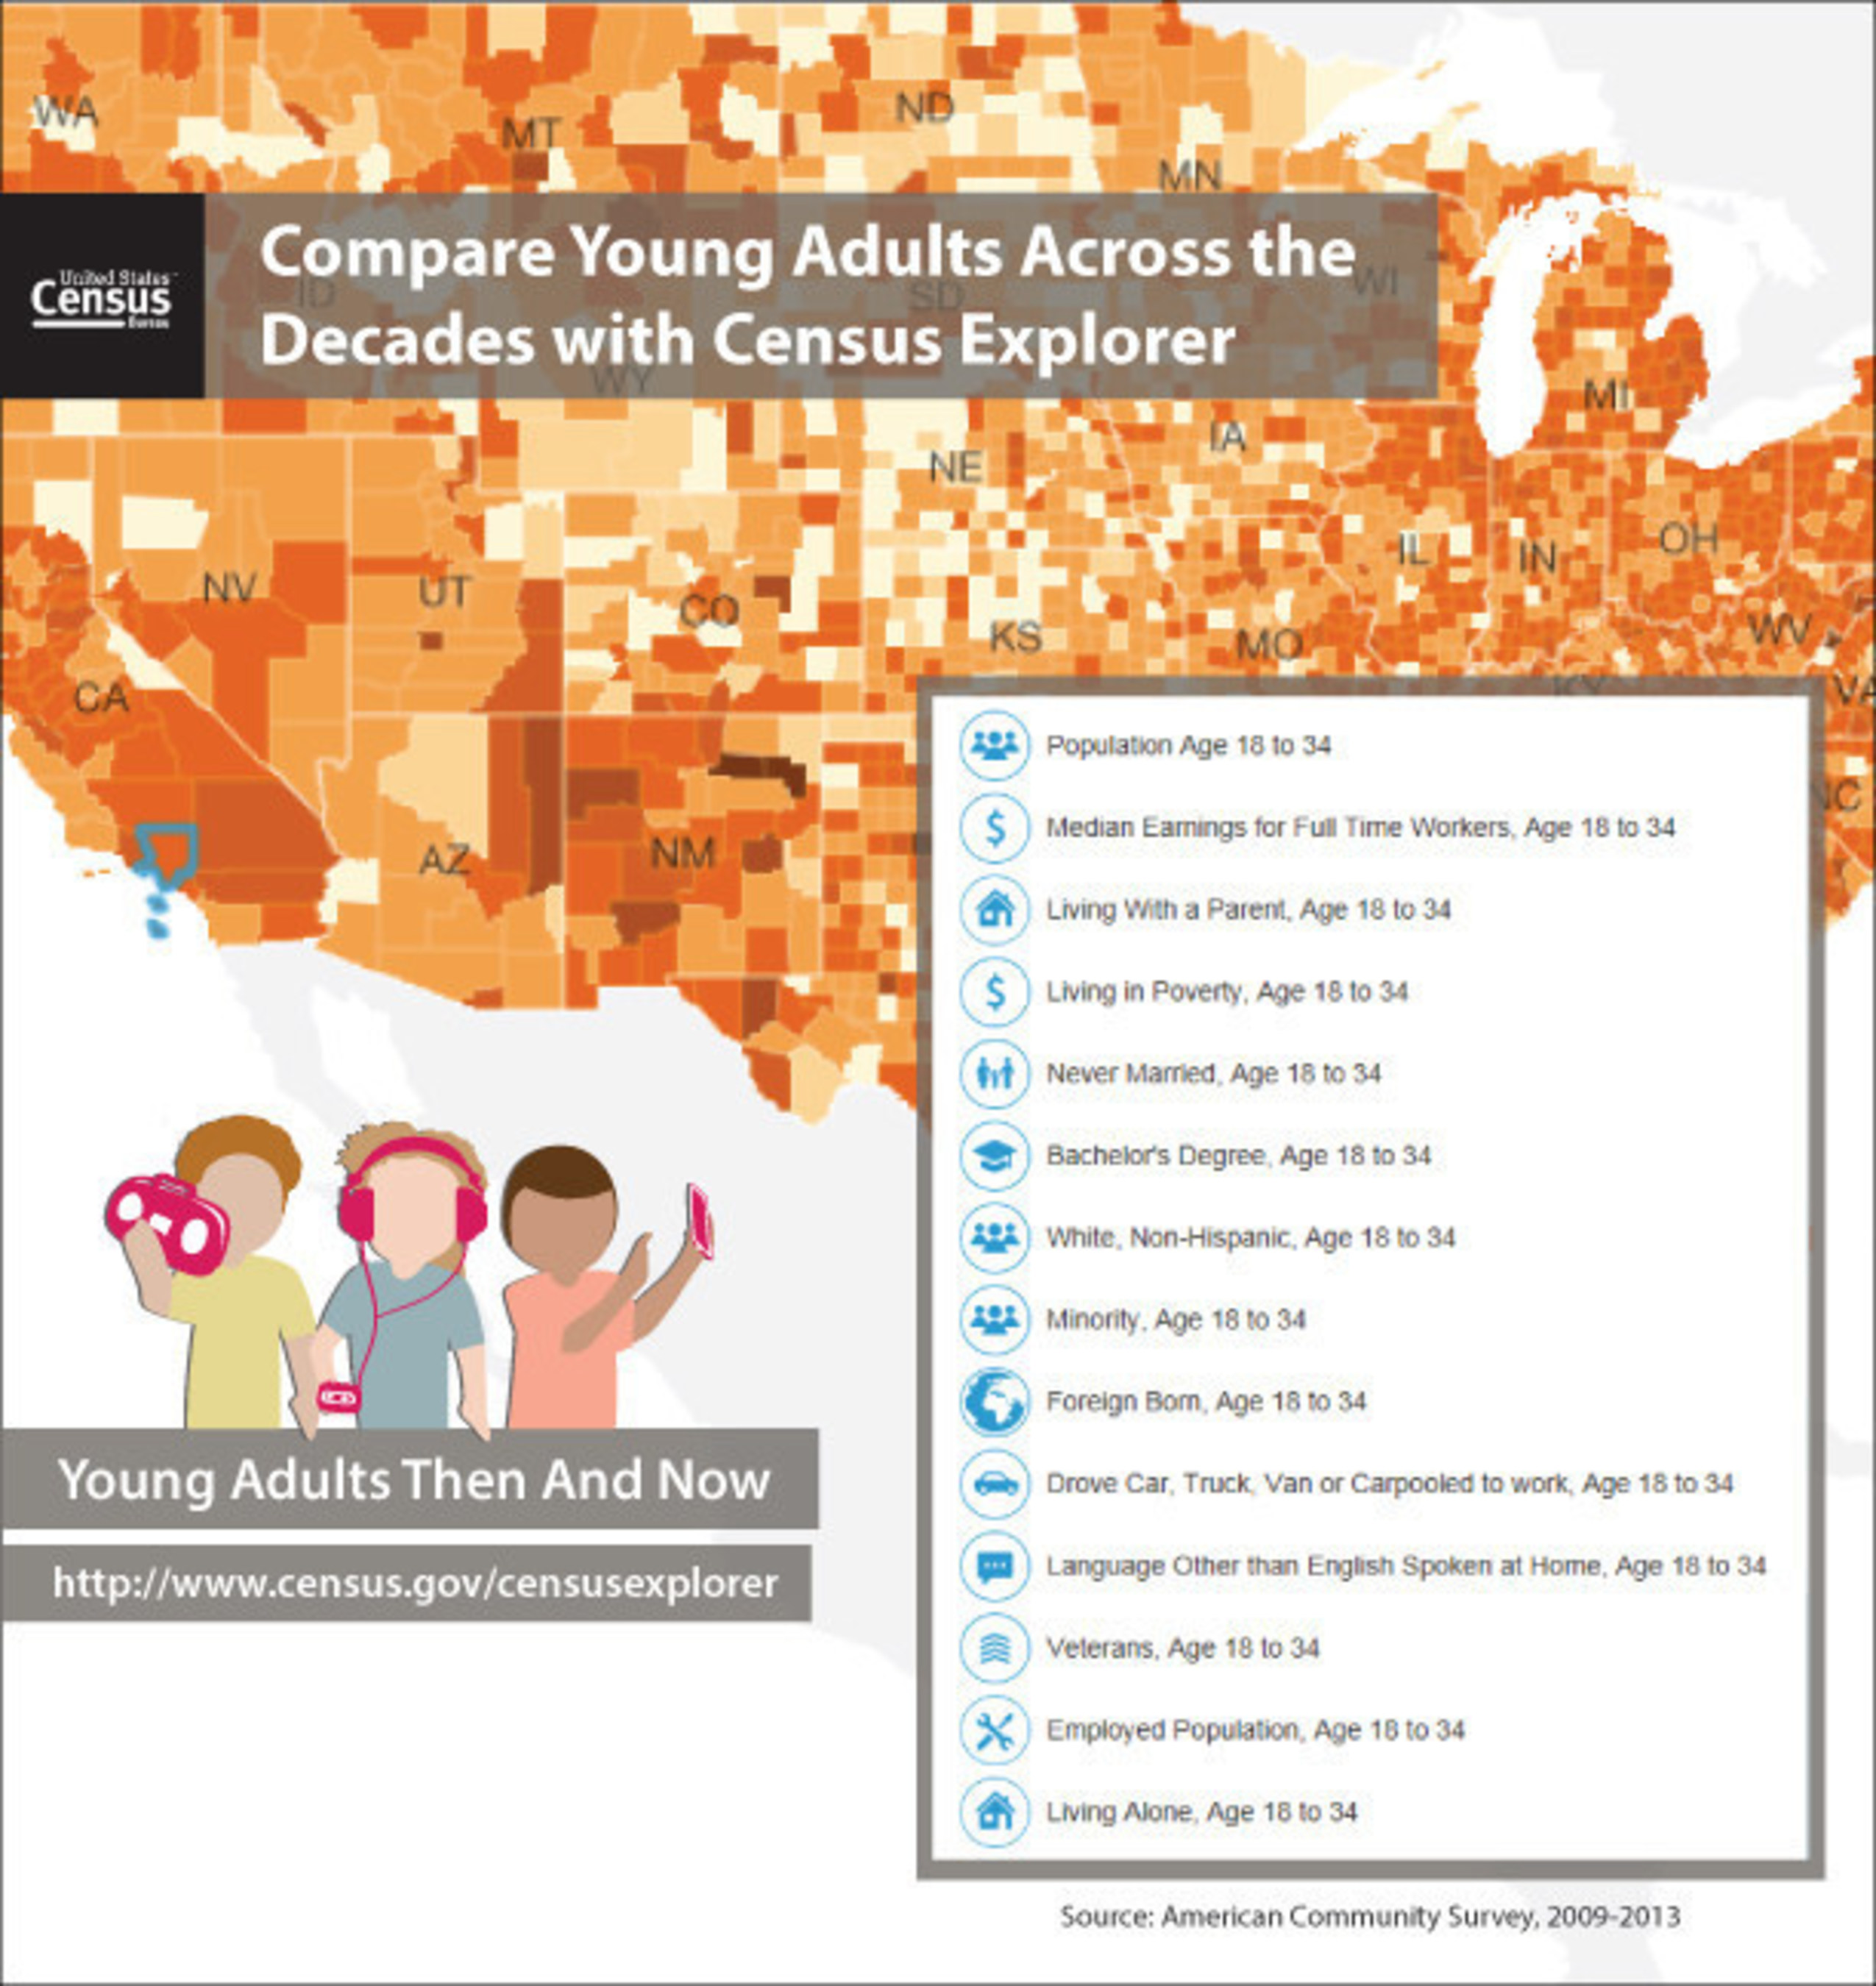 Young adults today, often called the millennial generation, are more likely to be foreign born and speak a language other than English at home, compared with young adults in 1980, according to the U.S. Census Bureau's latest statistics from the American Community Survey released today. A new edition of the interactive mapping tool, Census Explorer,  illustrates characteristics of young adults (age 18-34) across the decades using data from the 1980, 1990 and 2000 Censuses and the 2009-2013 American Community Survey.